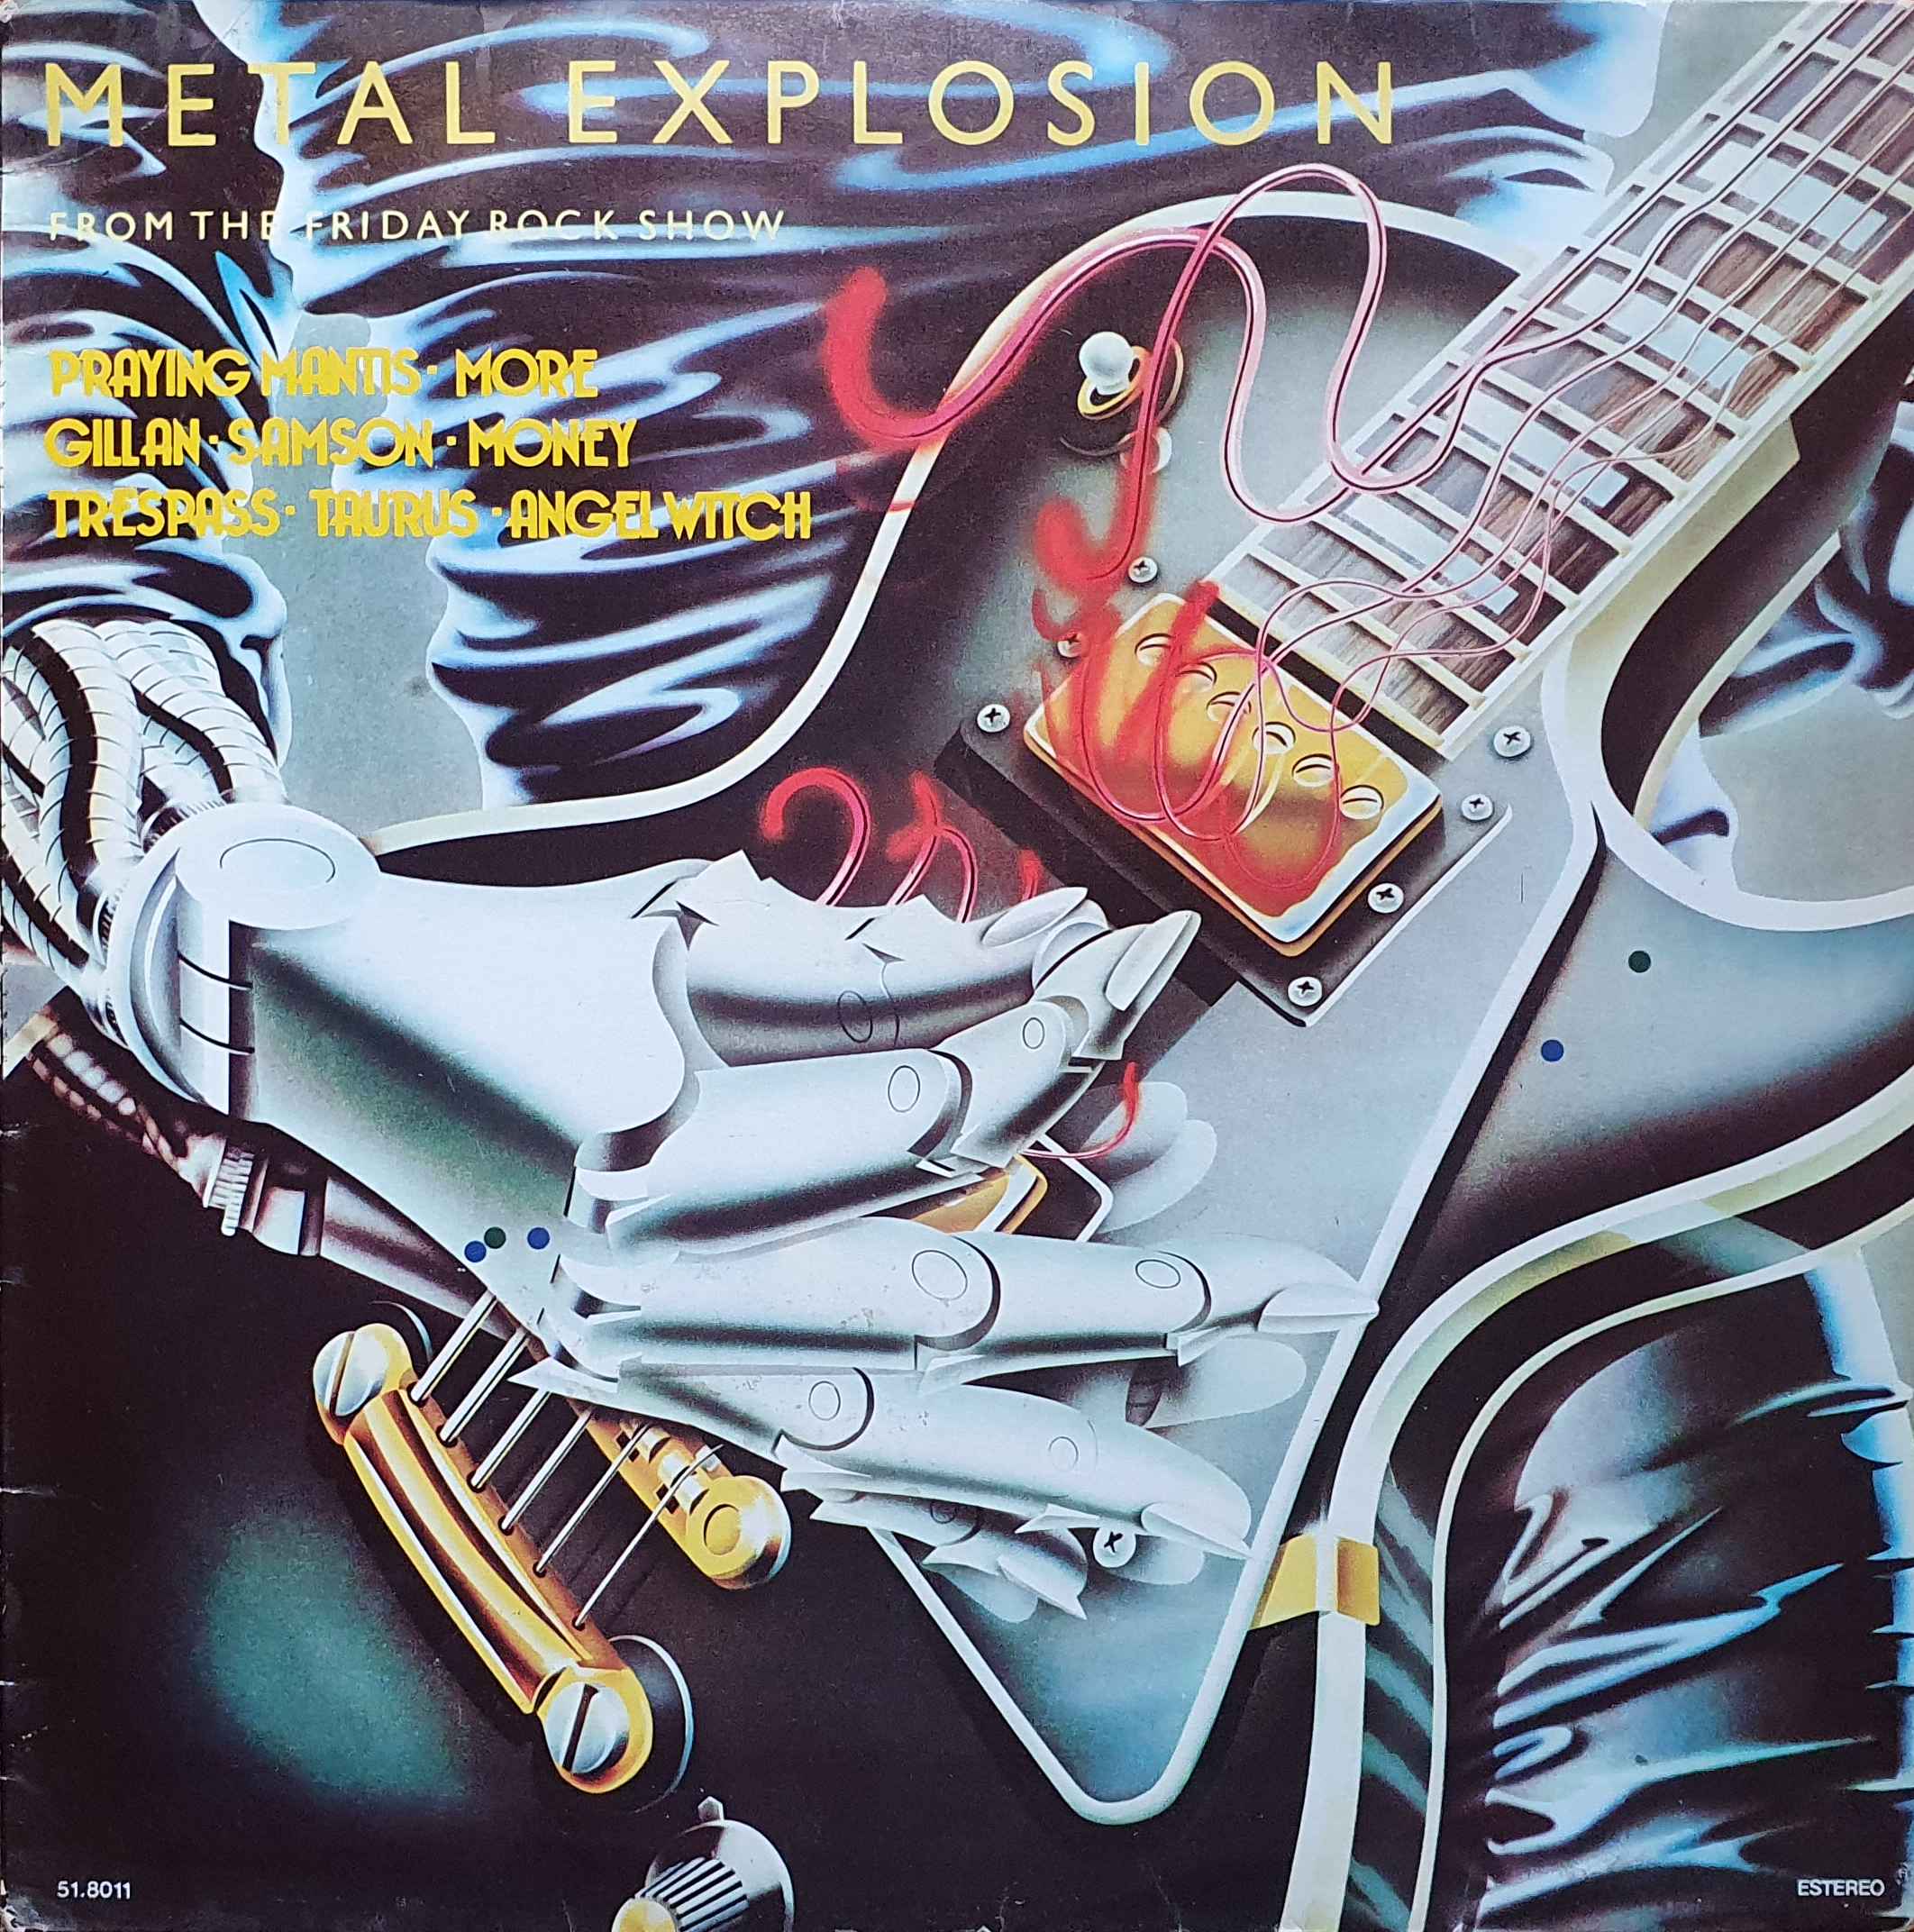 Picture of 51.8011 Metal explosion from The Friday Rock Show (Spanish import) by artist Various from the BBC albums - Records and Tapes library